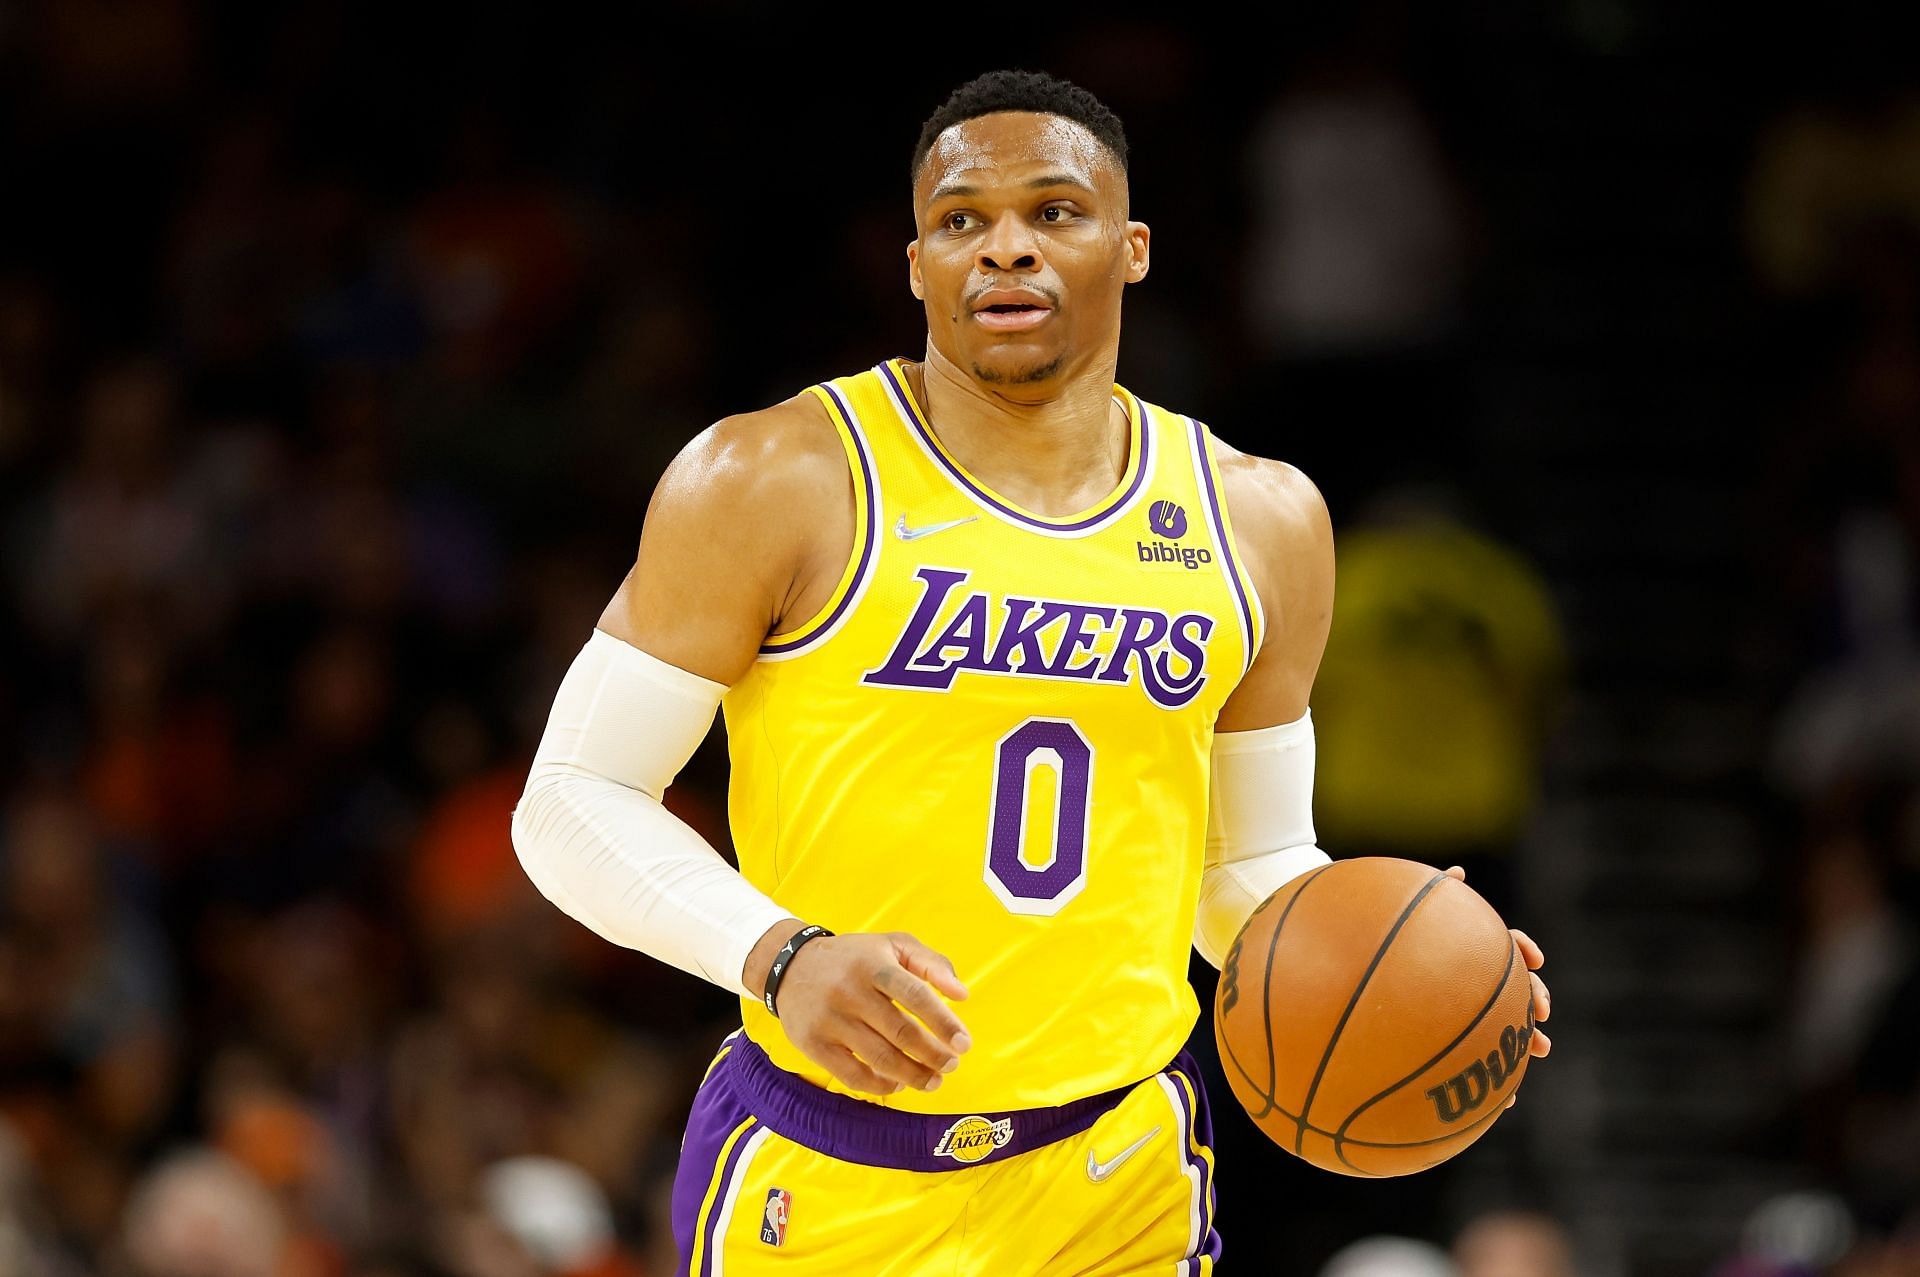 Russell Westbrook of the Los Angeles Lakers handles the ball.